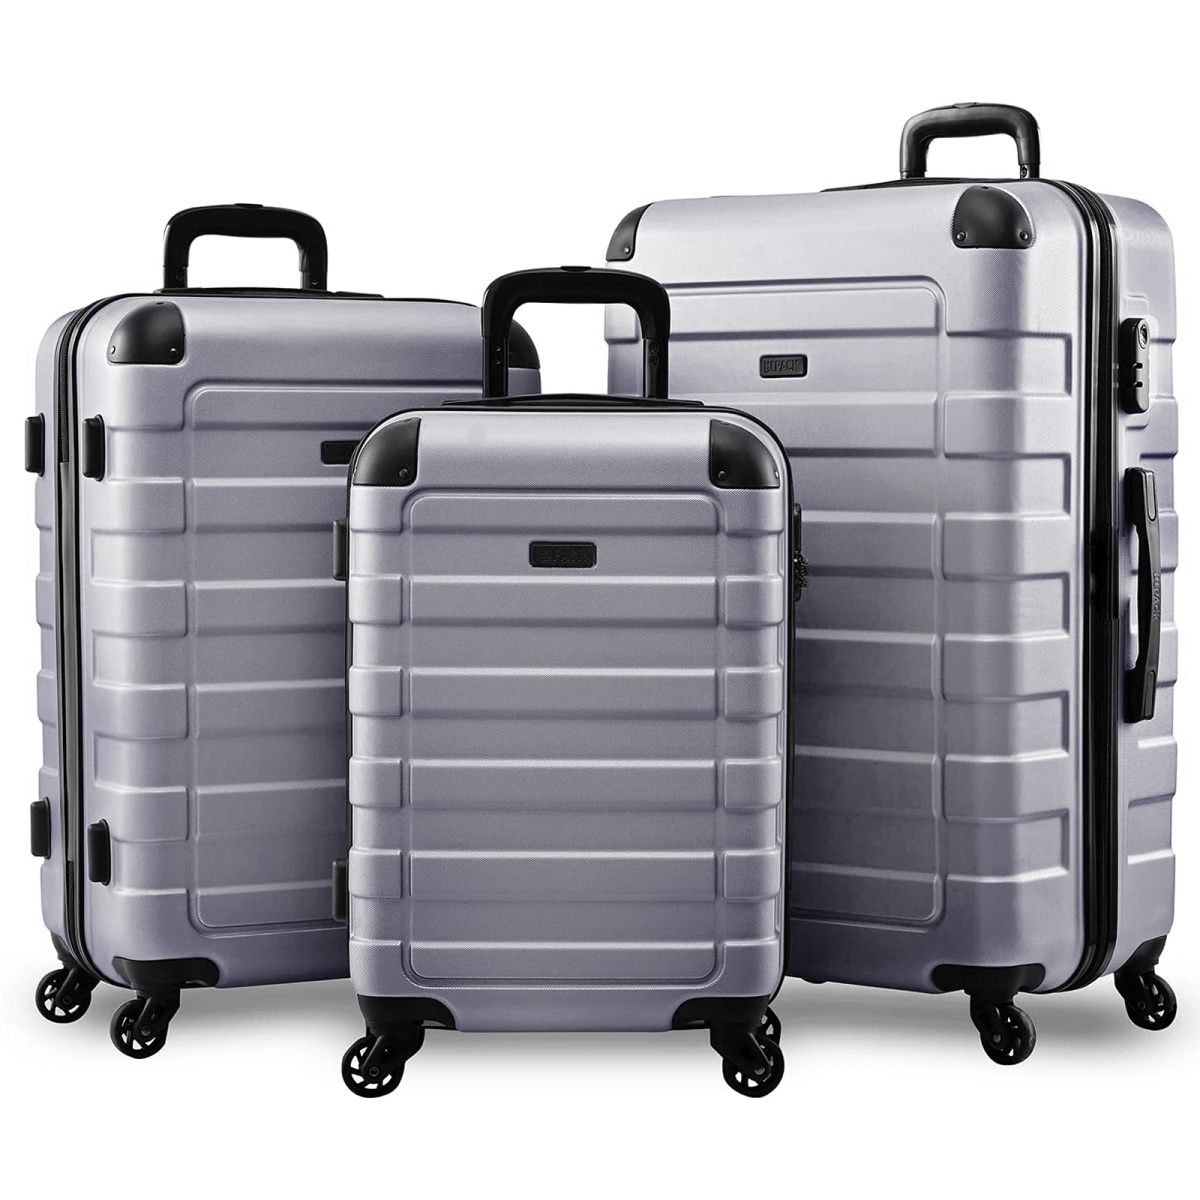 Picture of Hipack 25HP1903-SILVER Hipack Prime Hardside 3-Piece Spinner Luggage Set - Silver